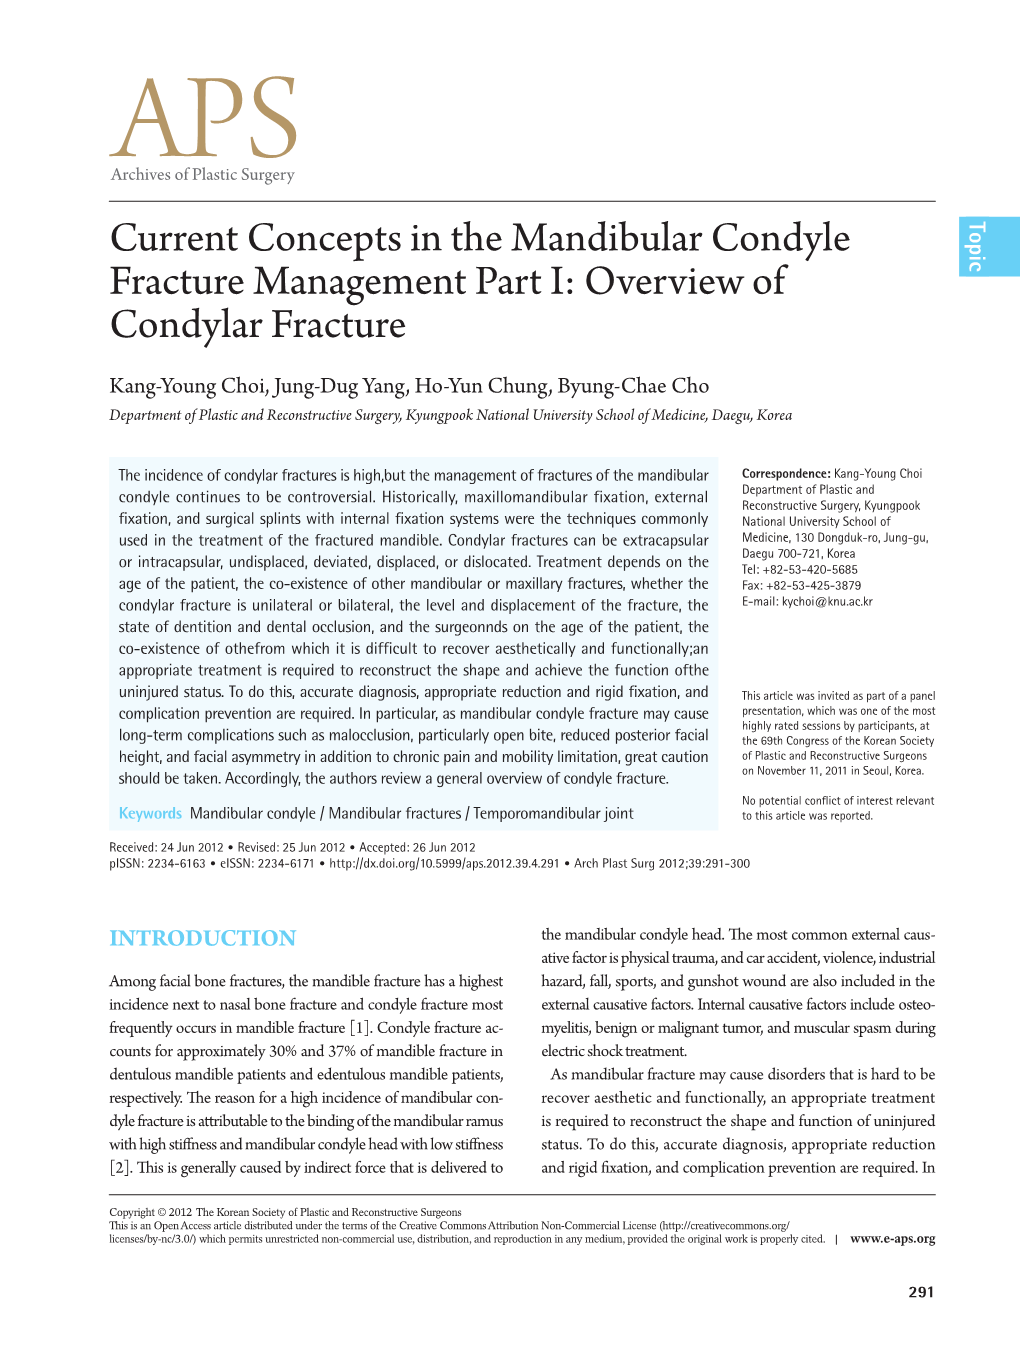 Current Concepts in the Mandibular Condyle Fracture Management Part I: Overview of Condylar Fracture